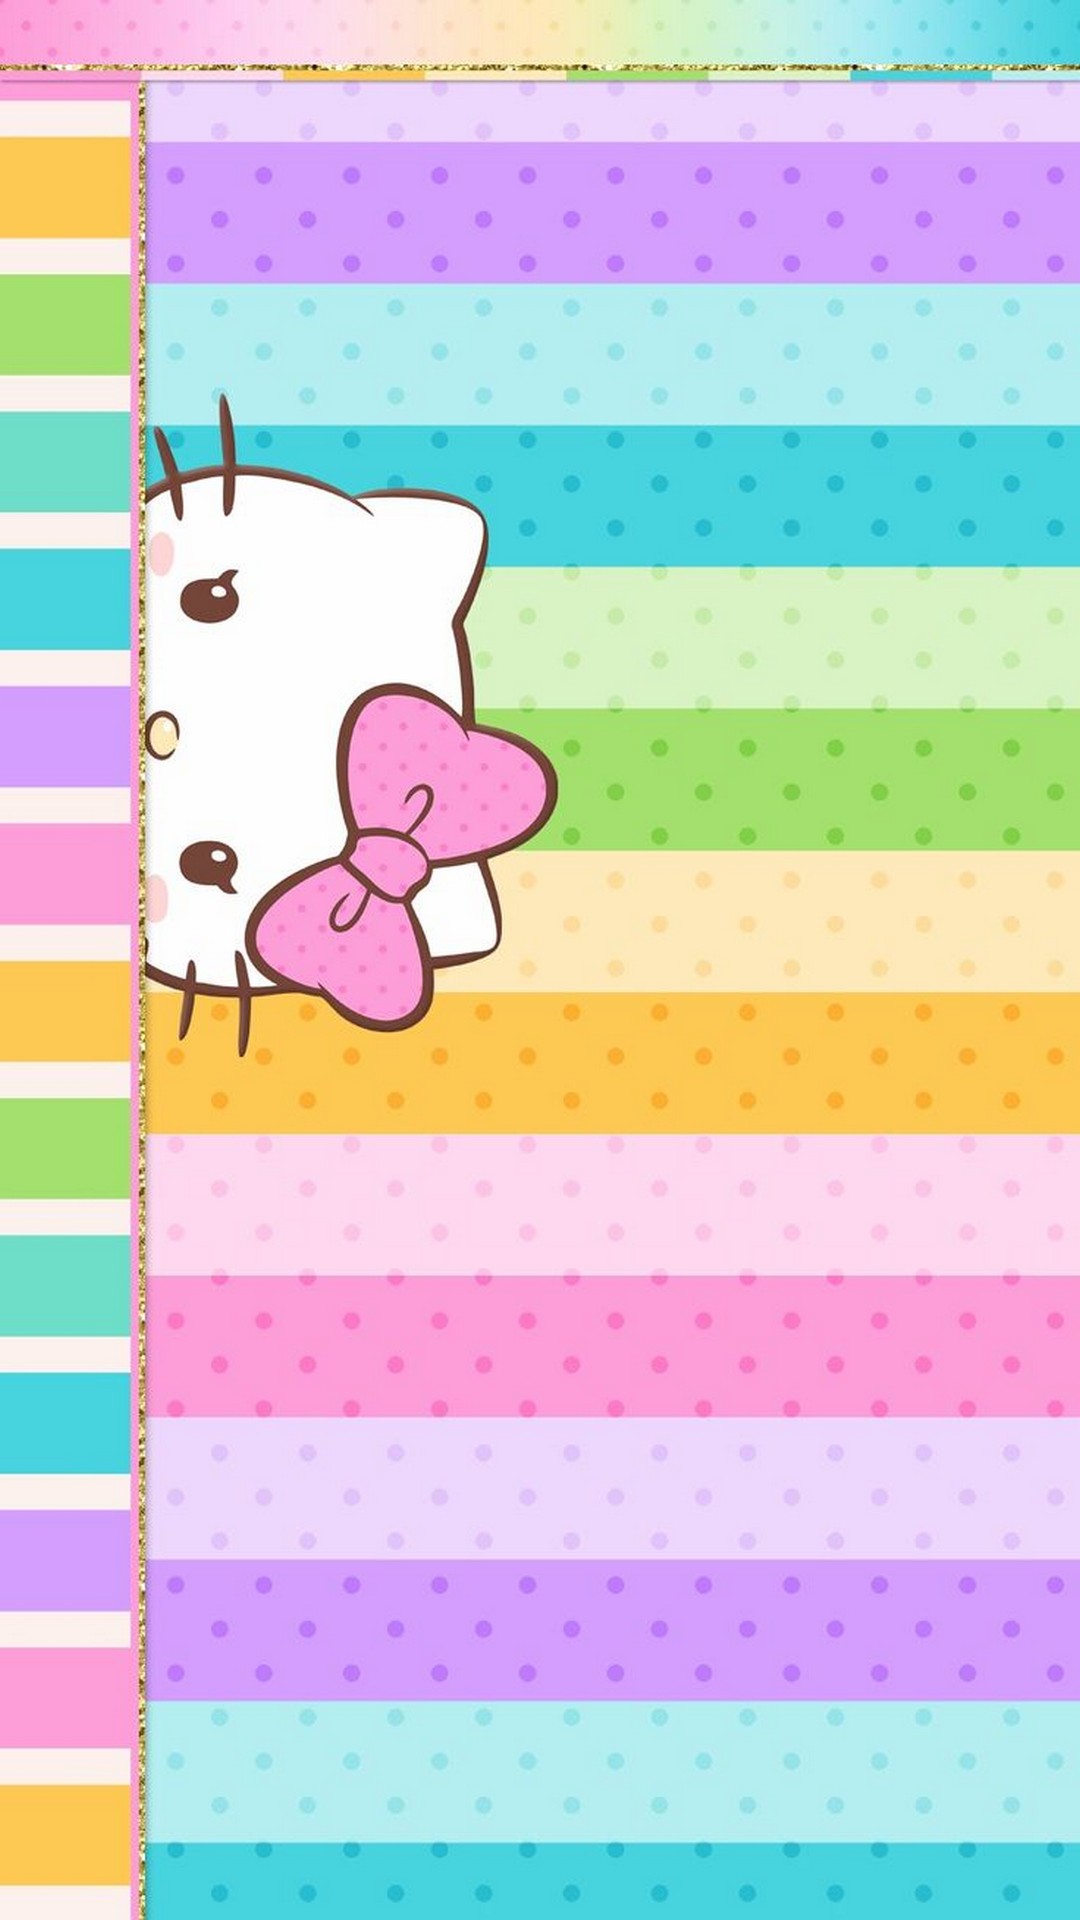 Hello Kitty Characters Android Wallpaper with image resolution 1080x1920 pixel. You can make this wallpaper for your Android backgrounds, Tablet, Smartphones Screensavers and Mobile Phone Lock Screen